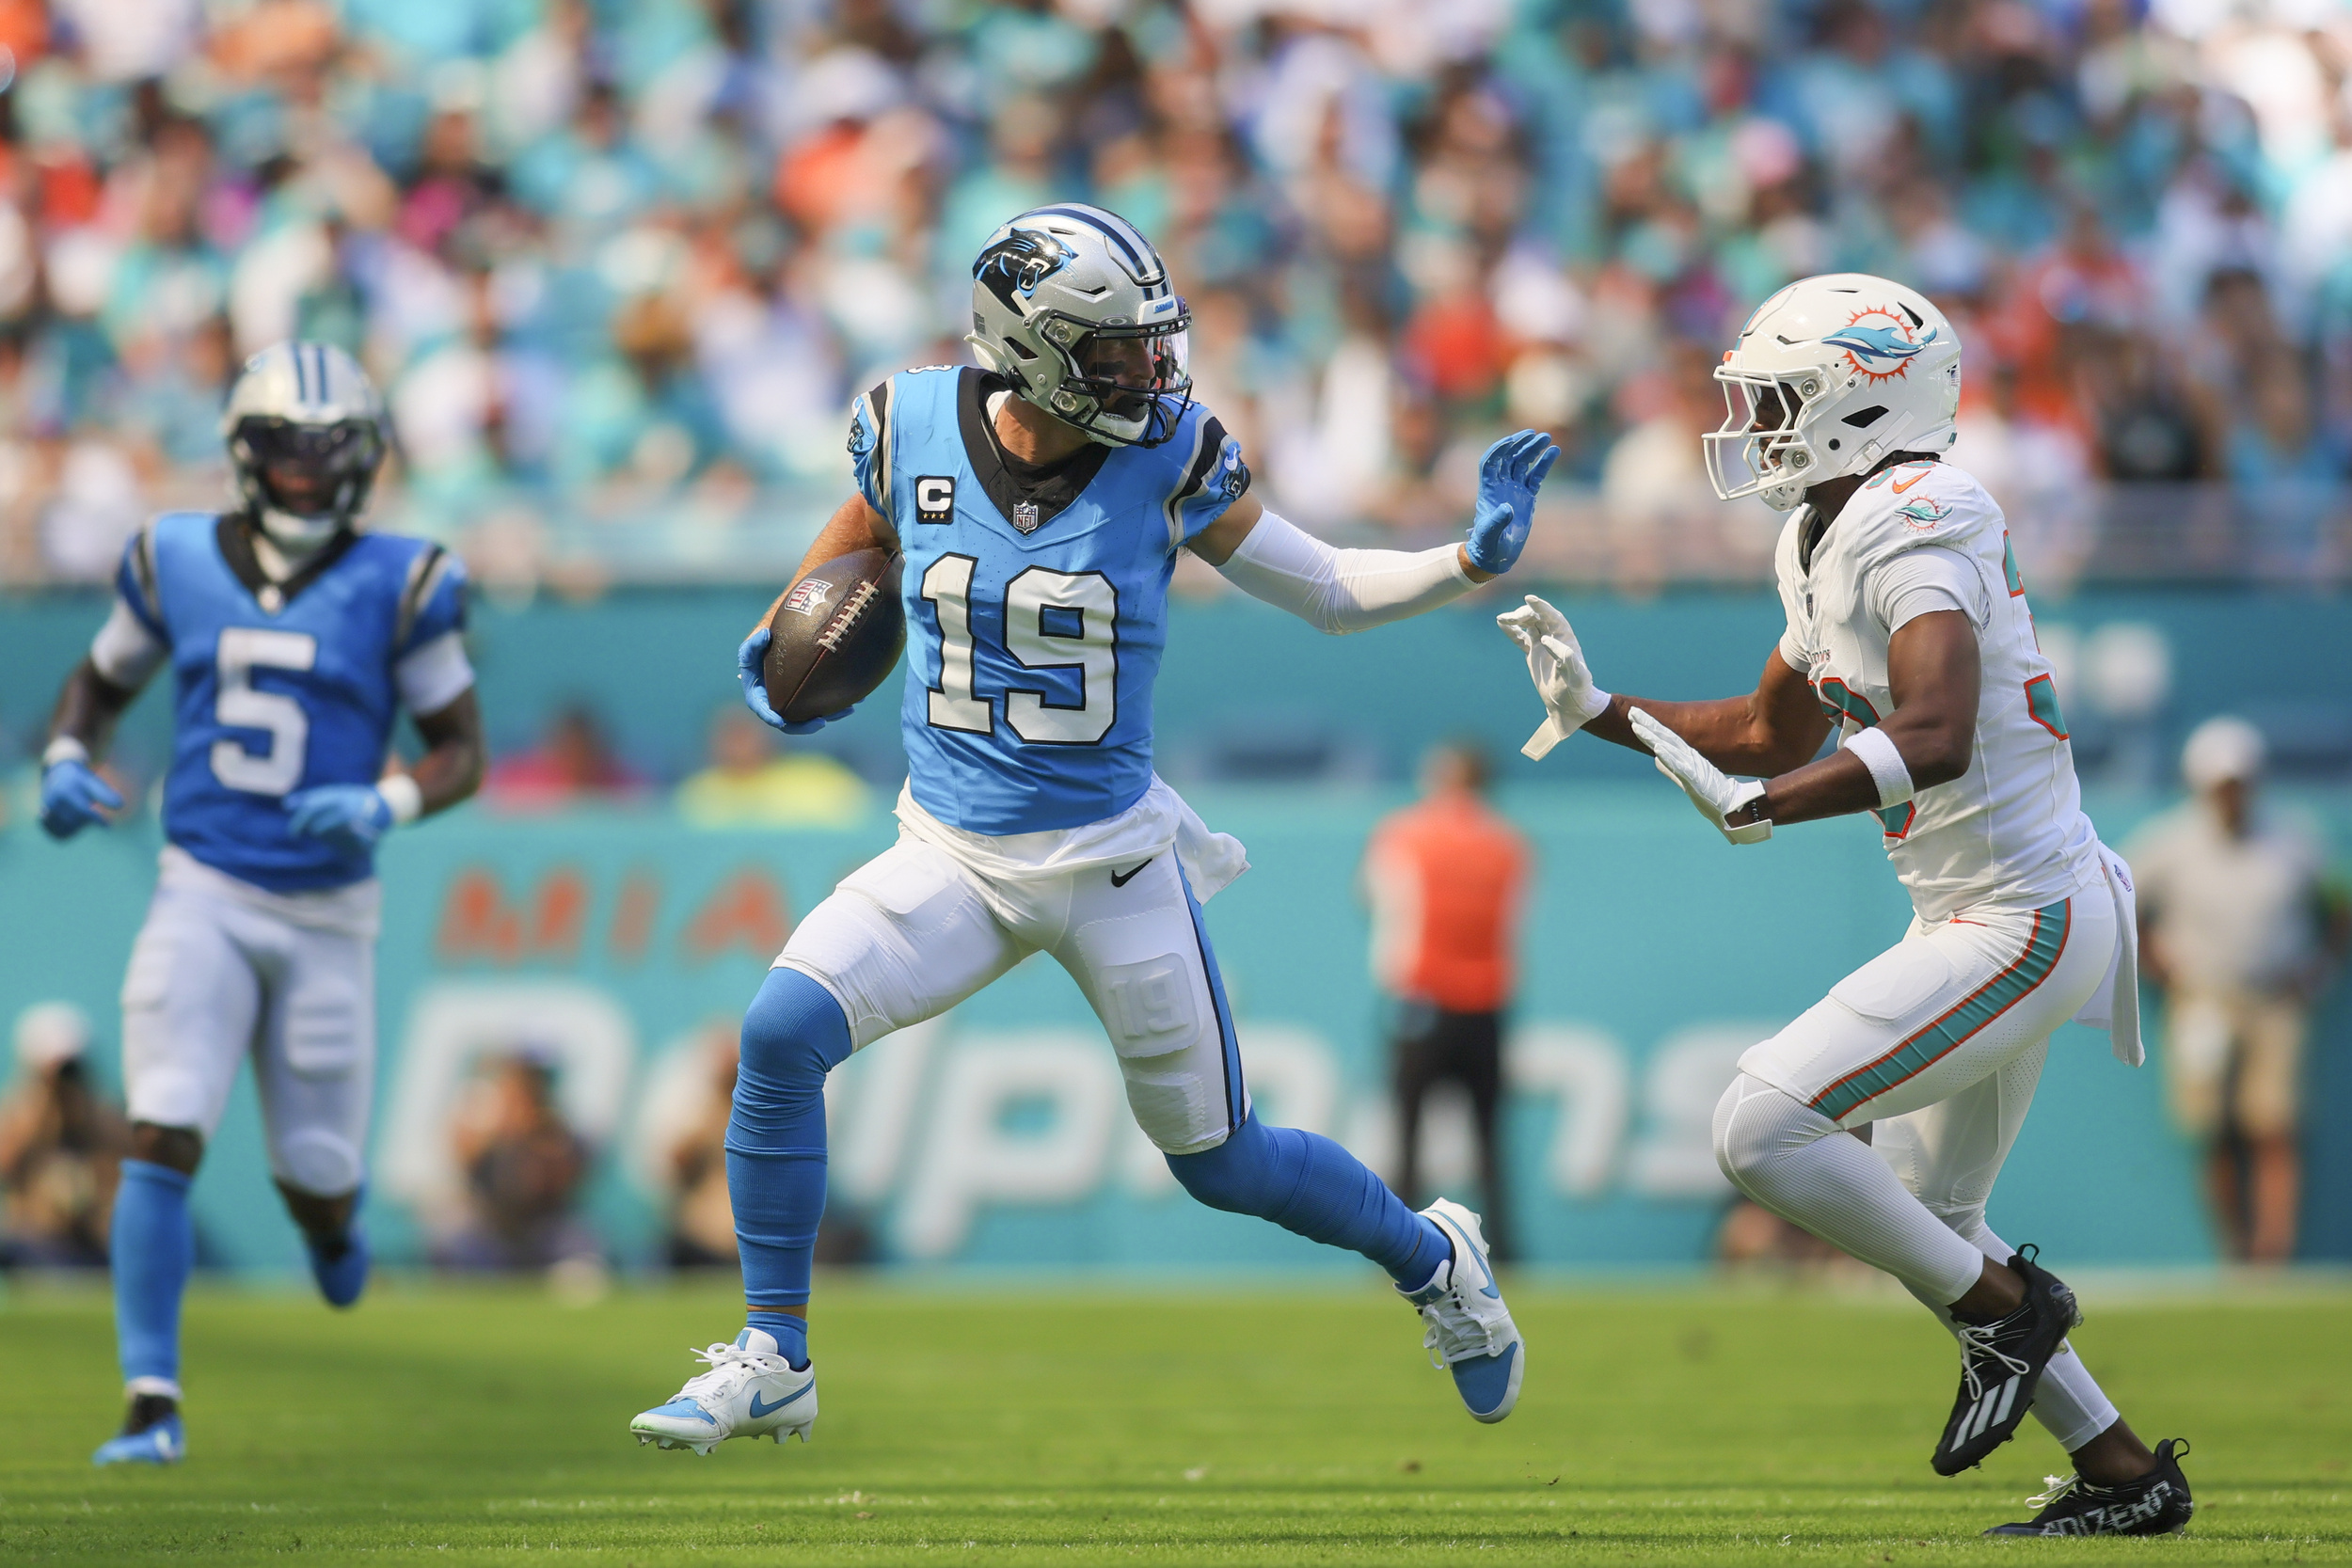 carolina panthers cut former chicago bears all-pro, offensive weapon